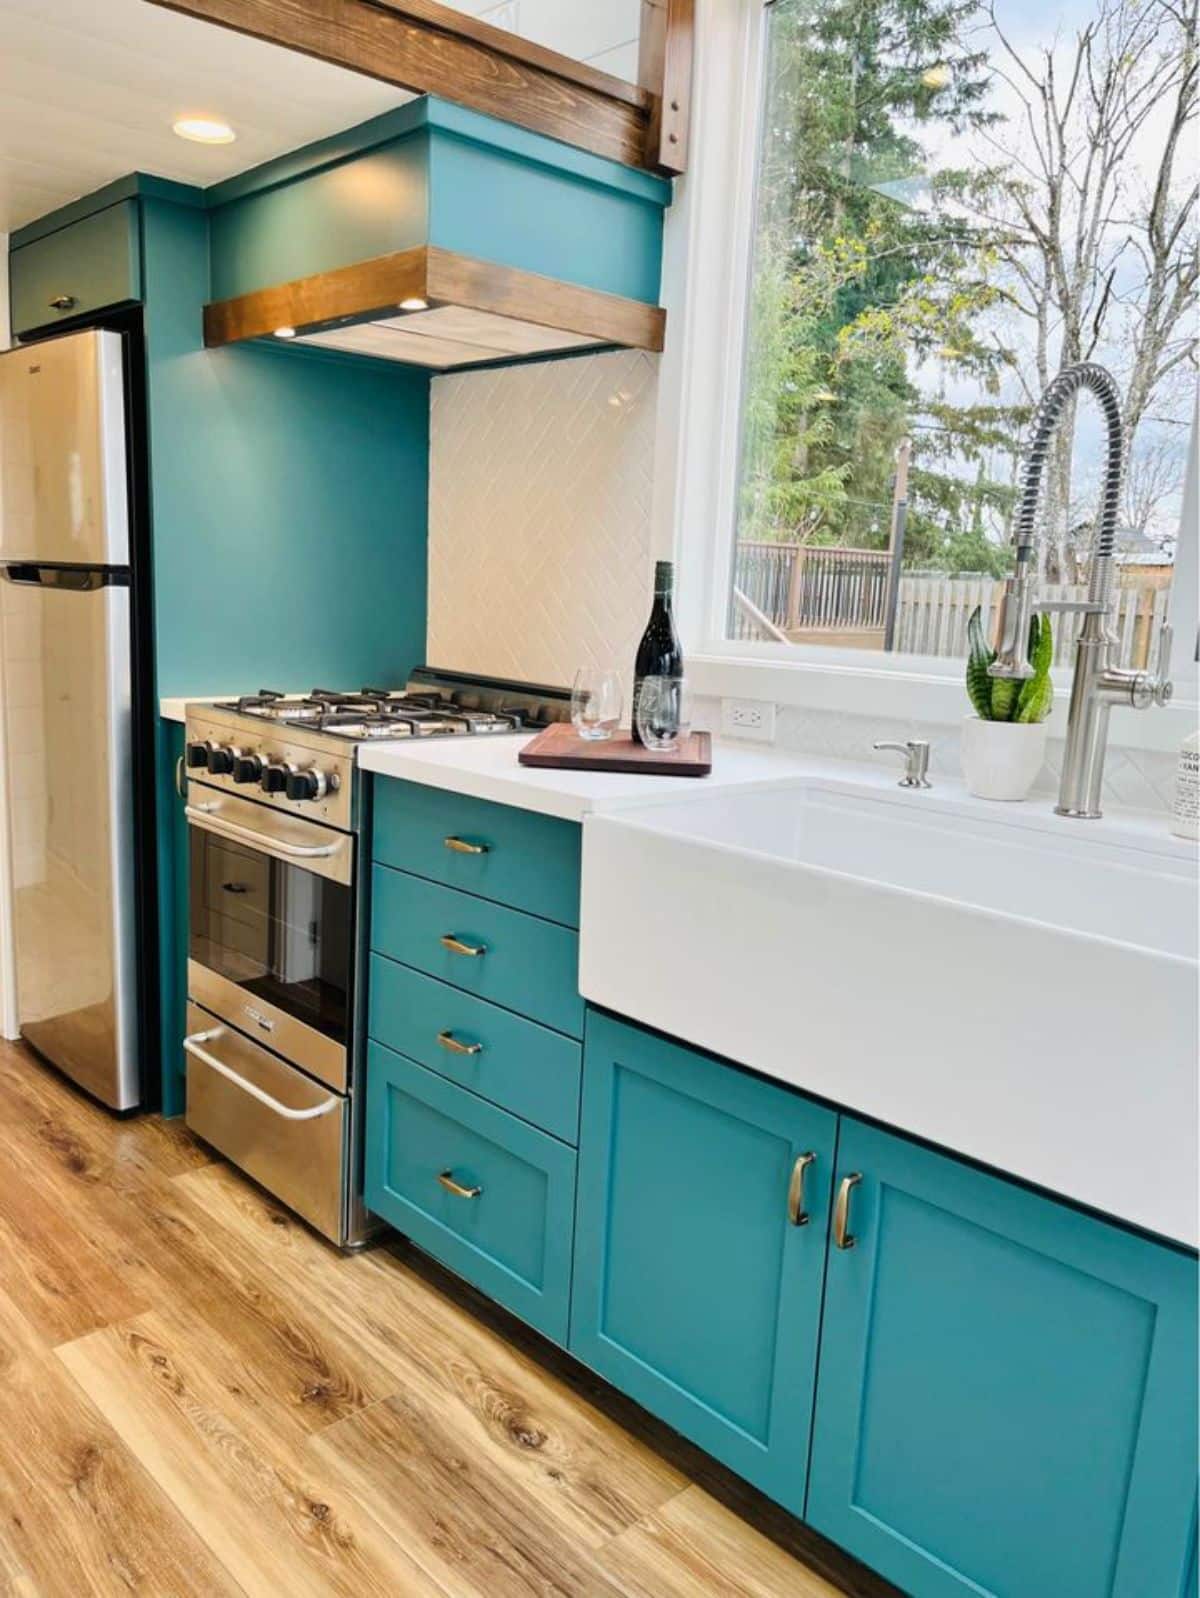 long kitchen countertop with storage cabinets